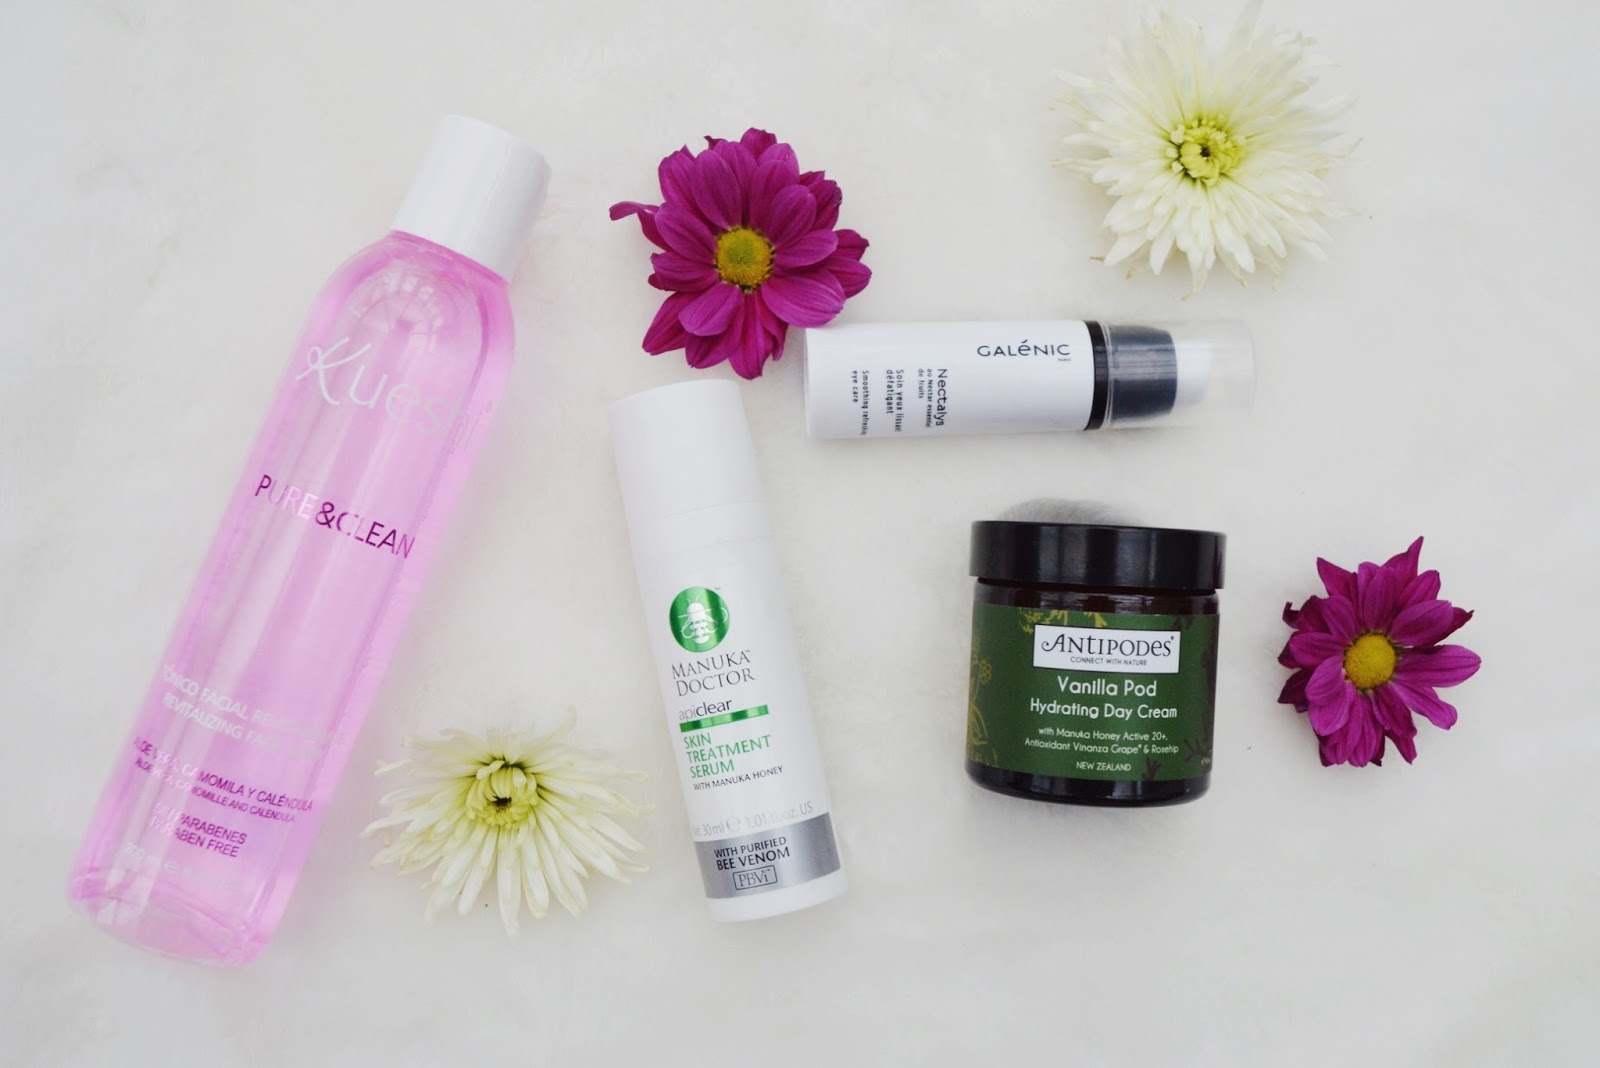 Daily Skincare Routine For Combination Skin, FashionFake, beauty bloggers